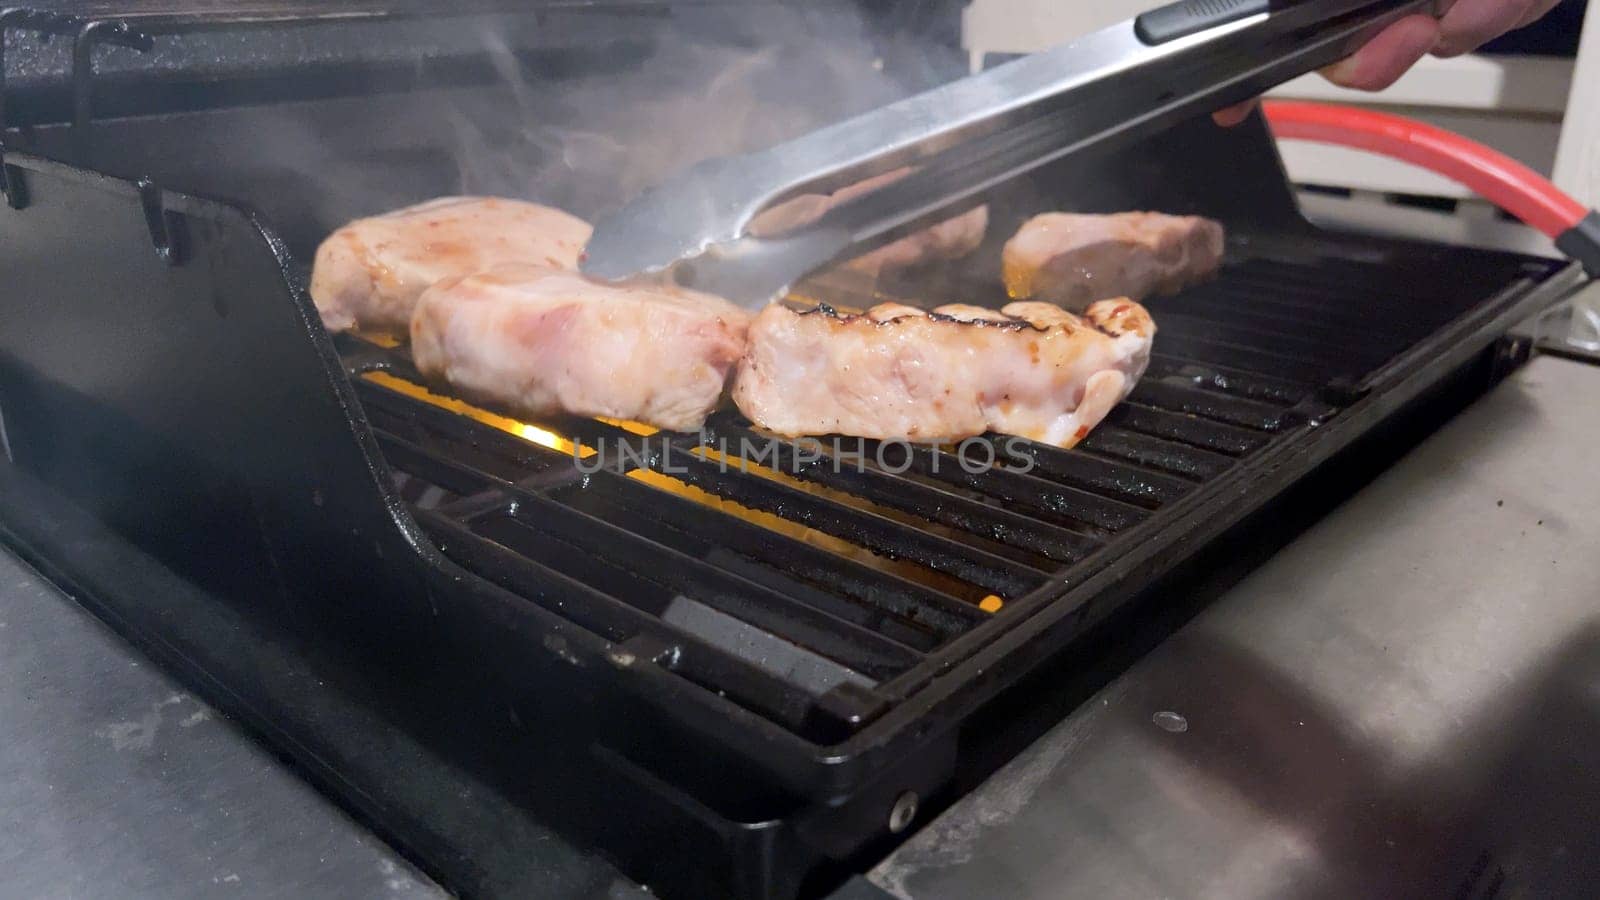 Perfectly Seasoned Pork Chops Sizzling on an Outdoor Gas Grill by arinahabich